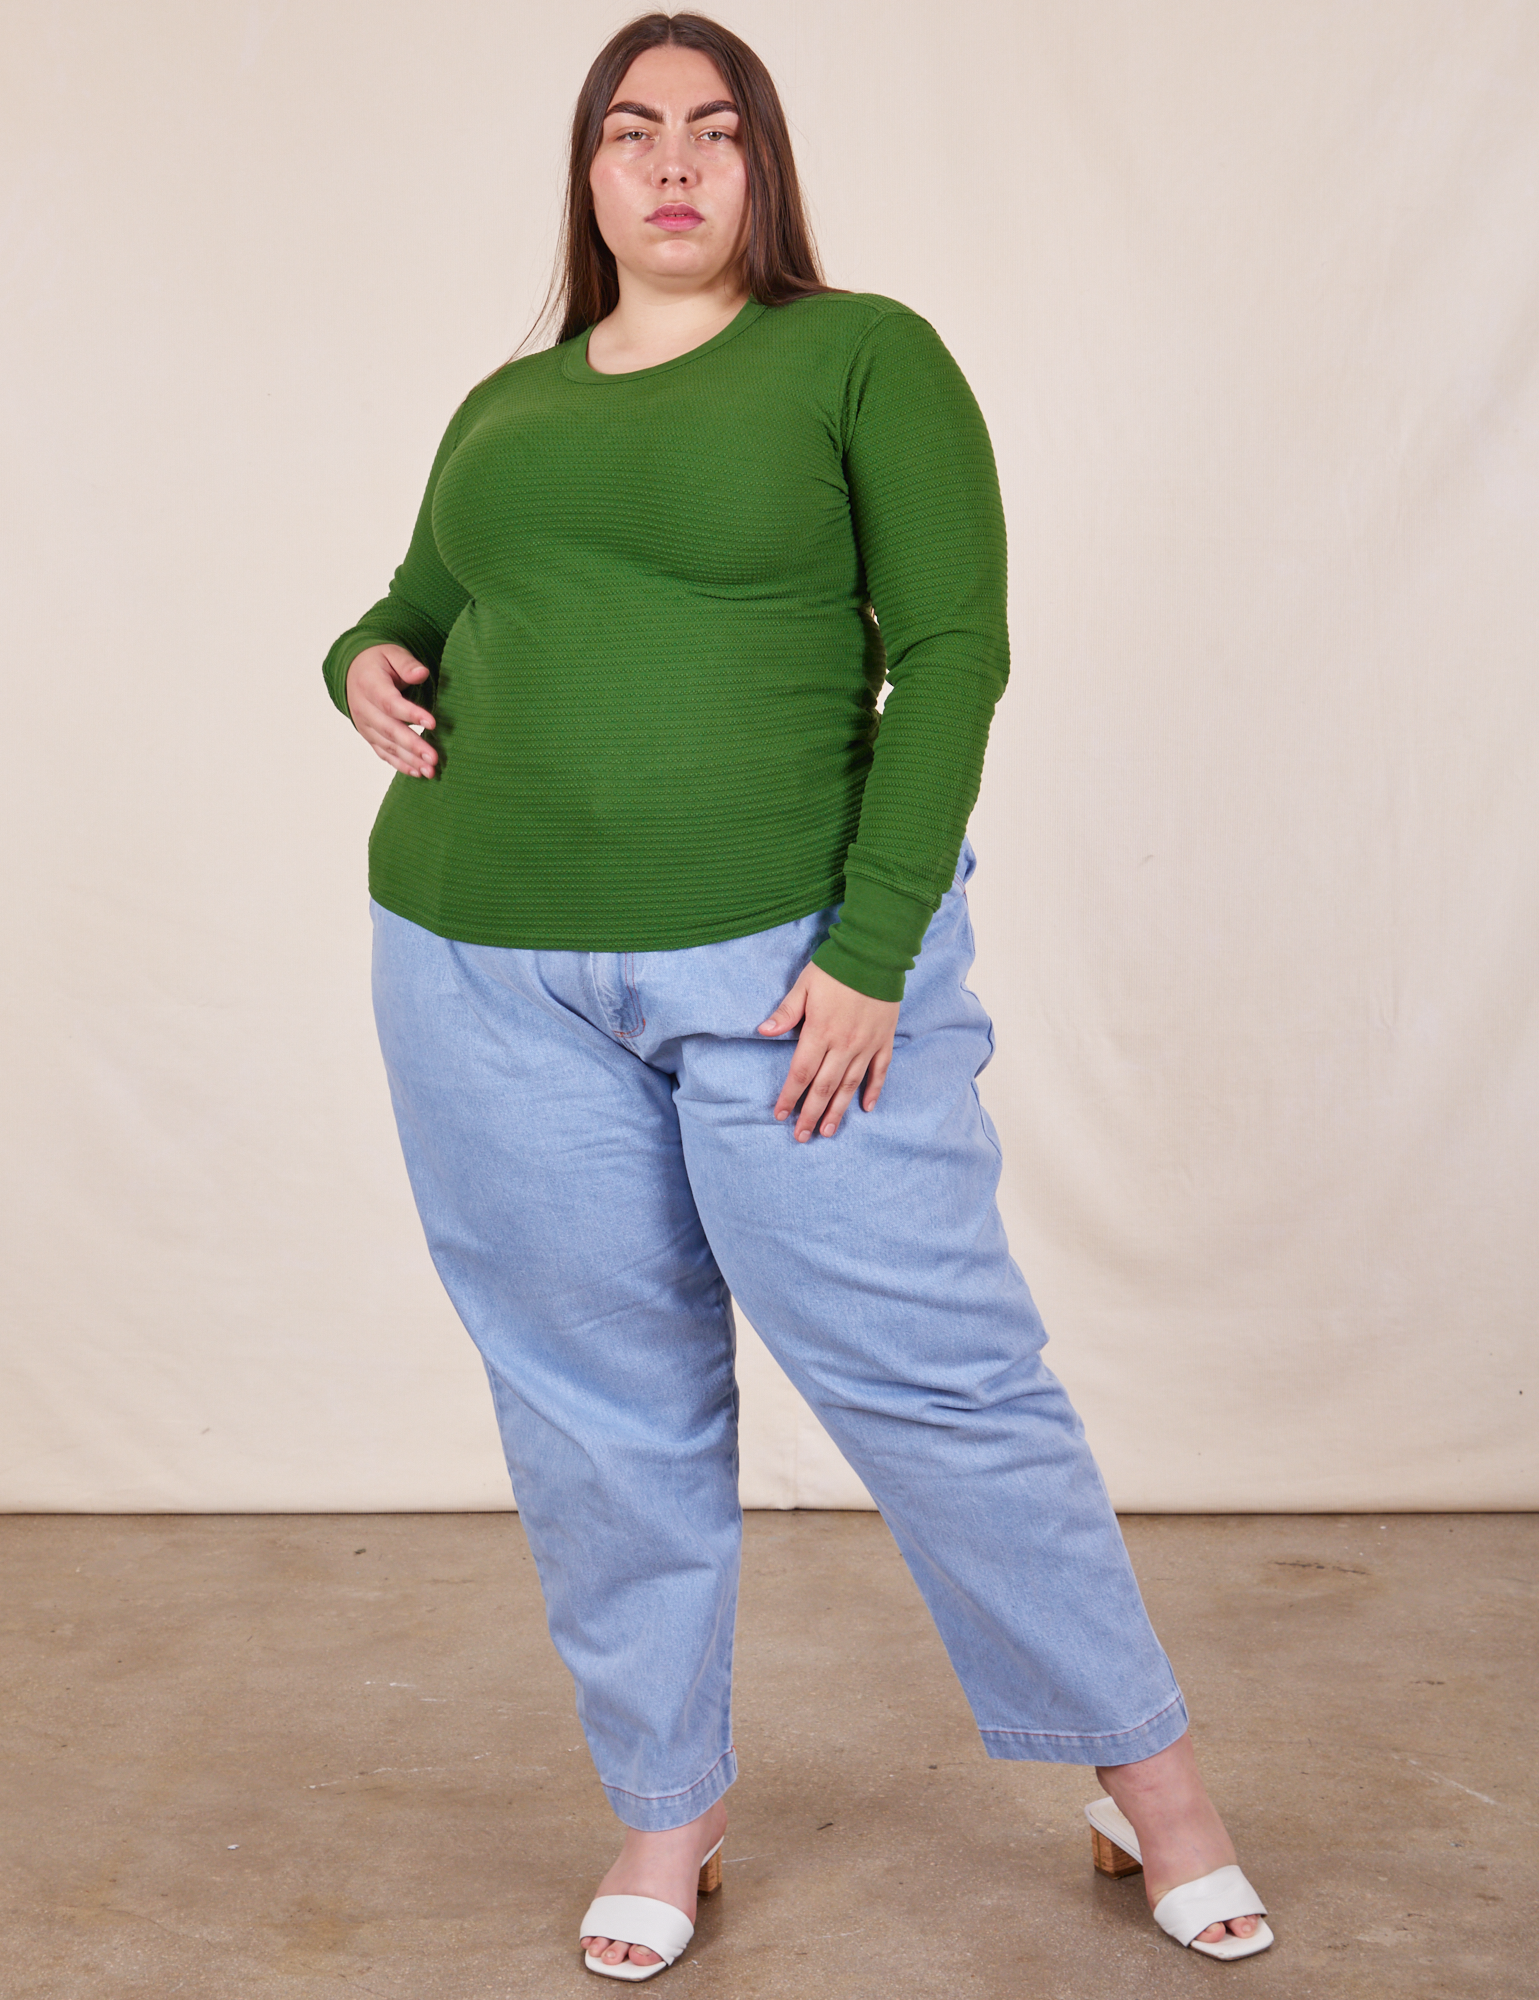 Marielena is wearing 2XL Honeycomb Thermal in Lawn Green